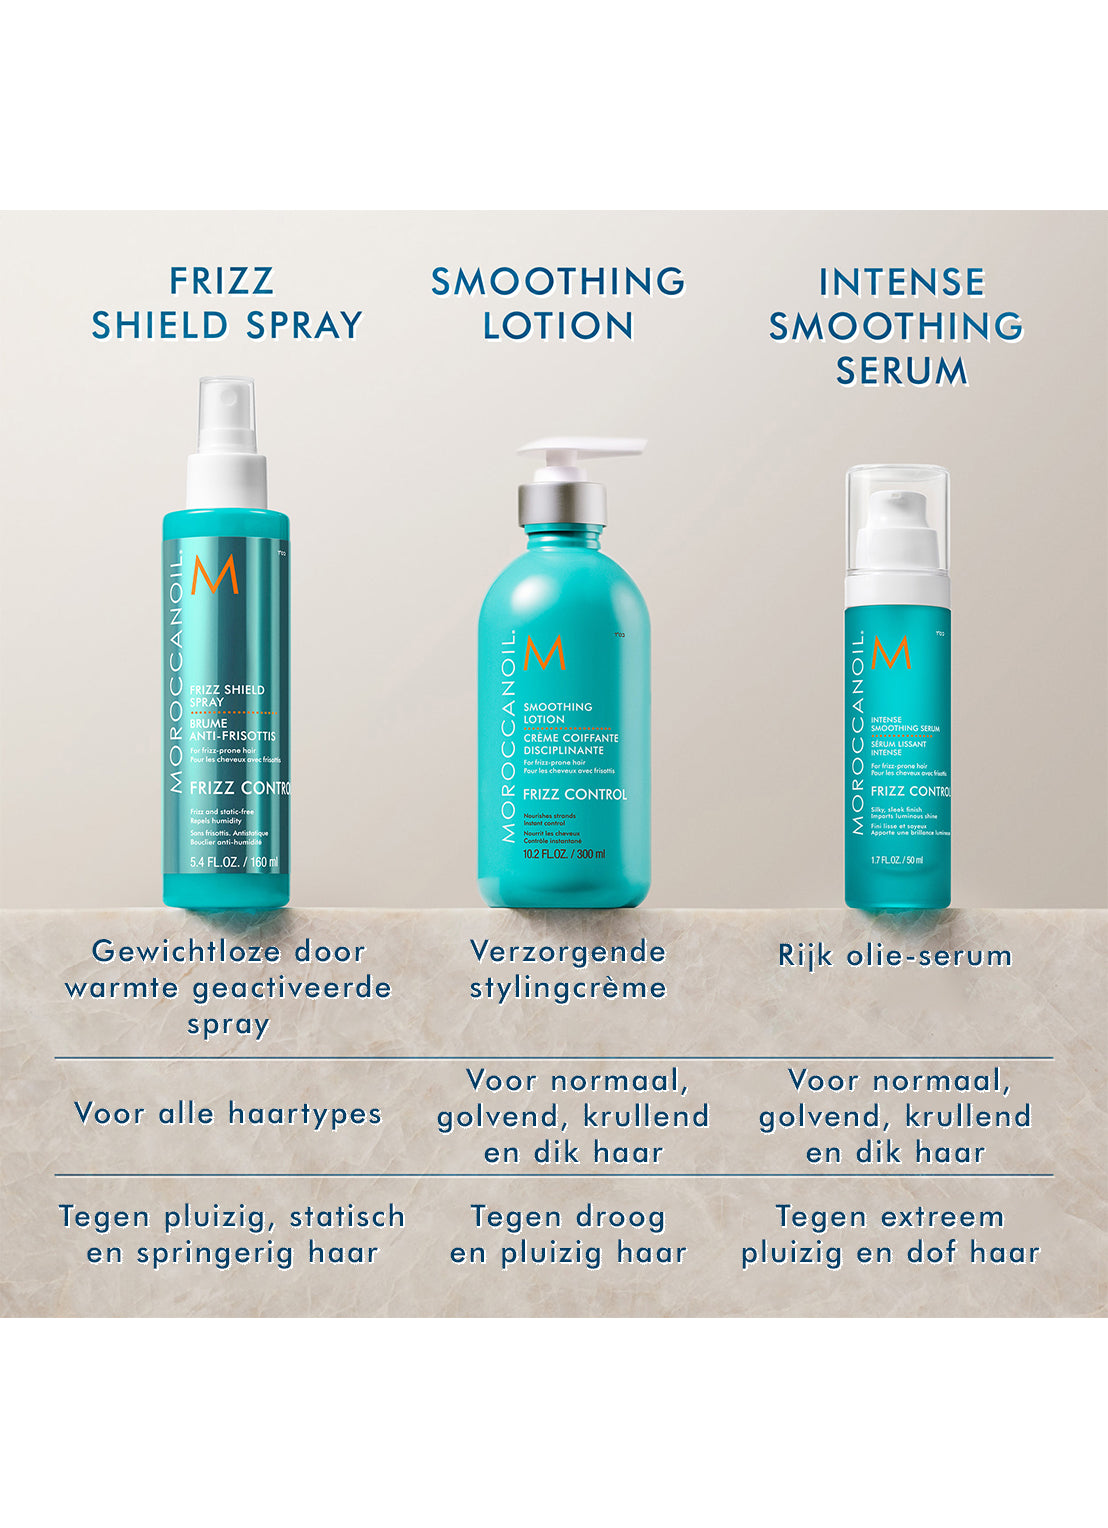 Frizz Smoothing Lotion